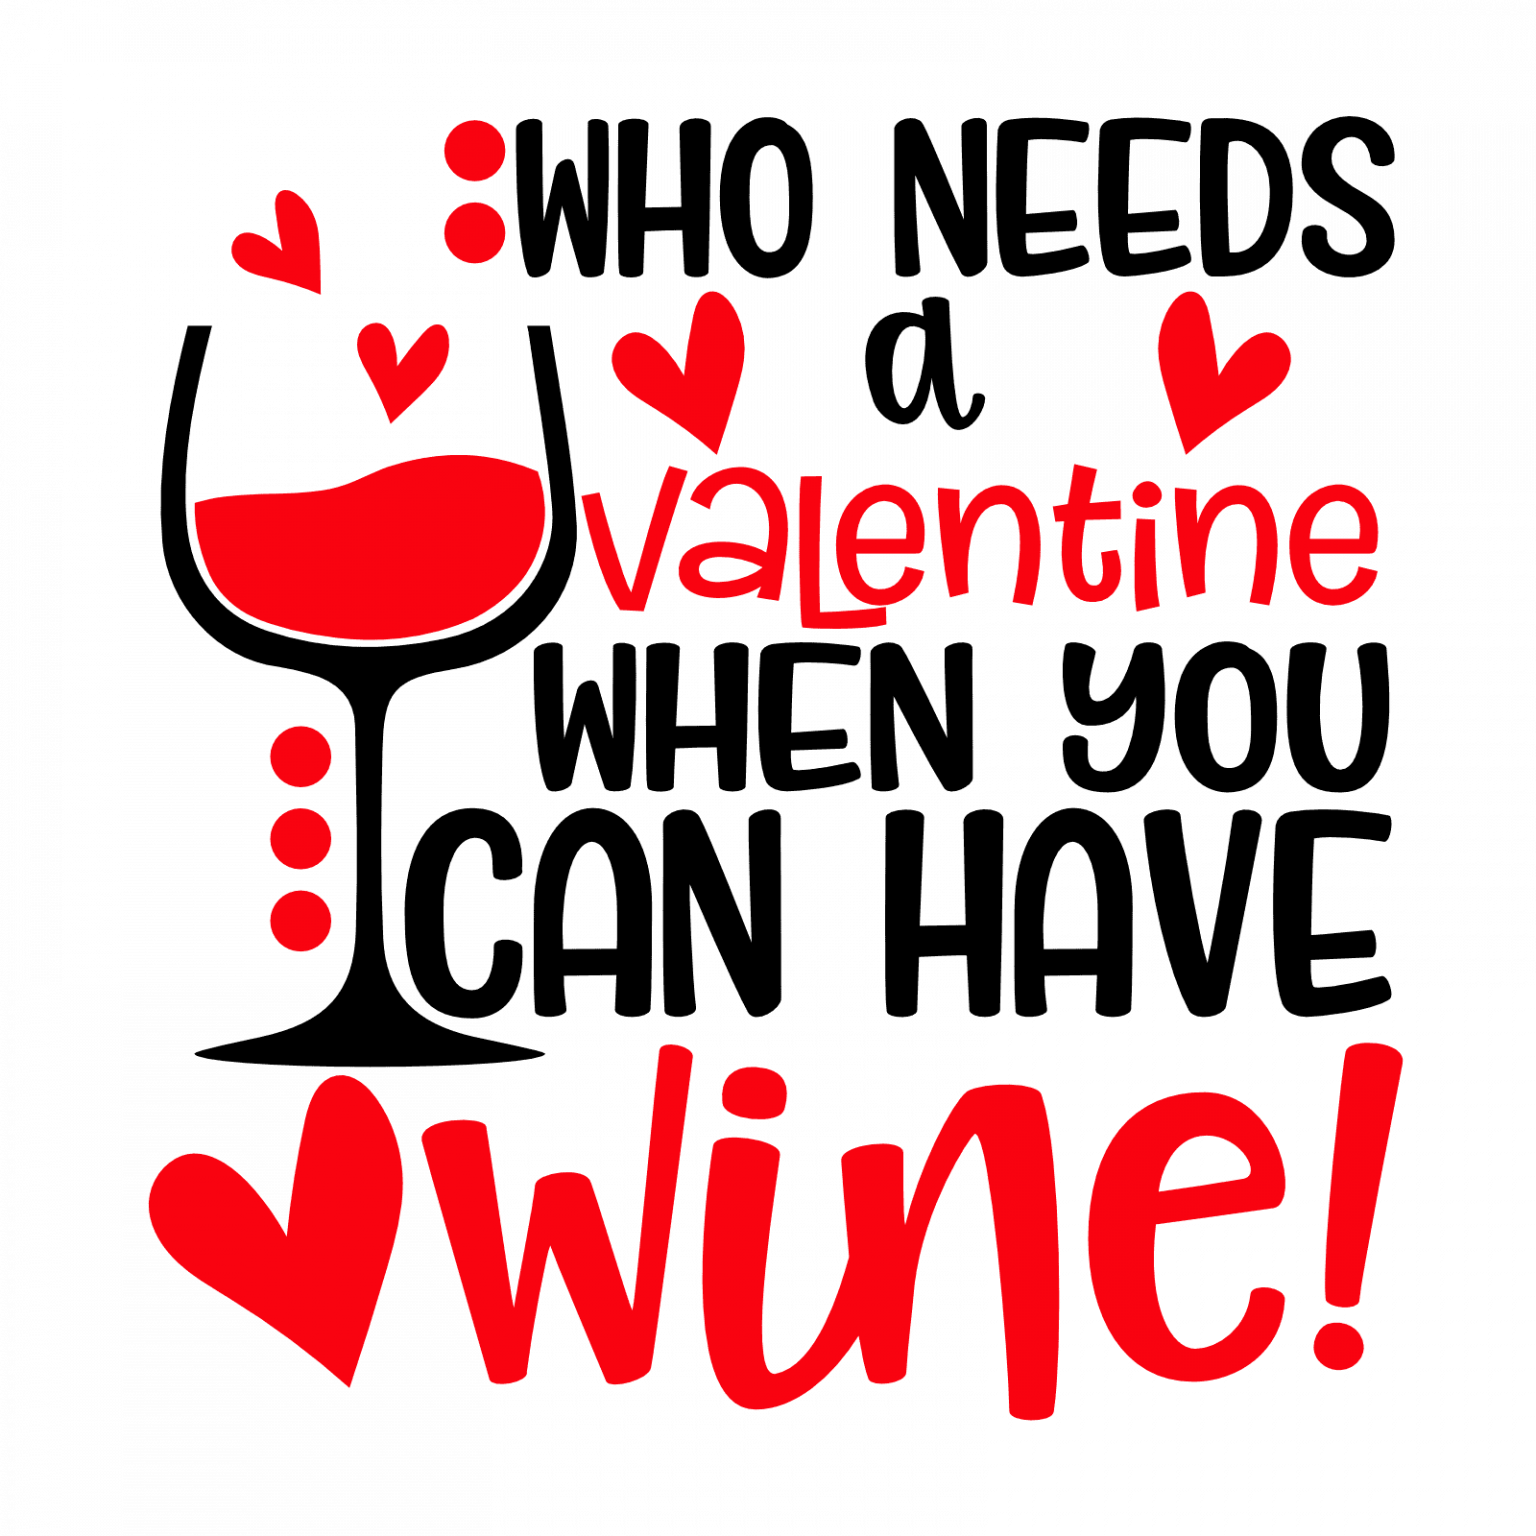 who-needs-a-valentine-when-you-can-have-wine-funny-valentines-day-free